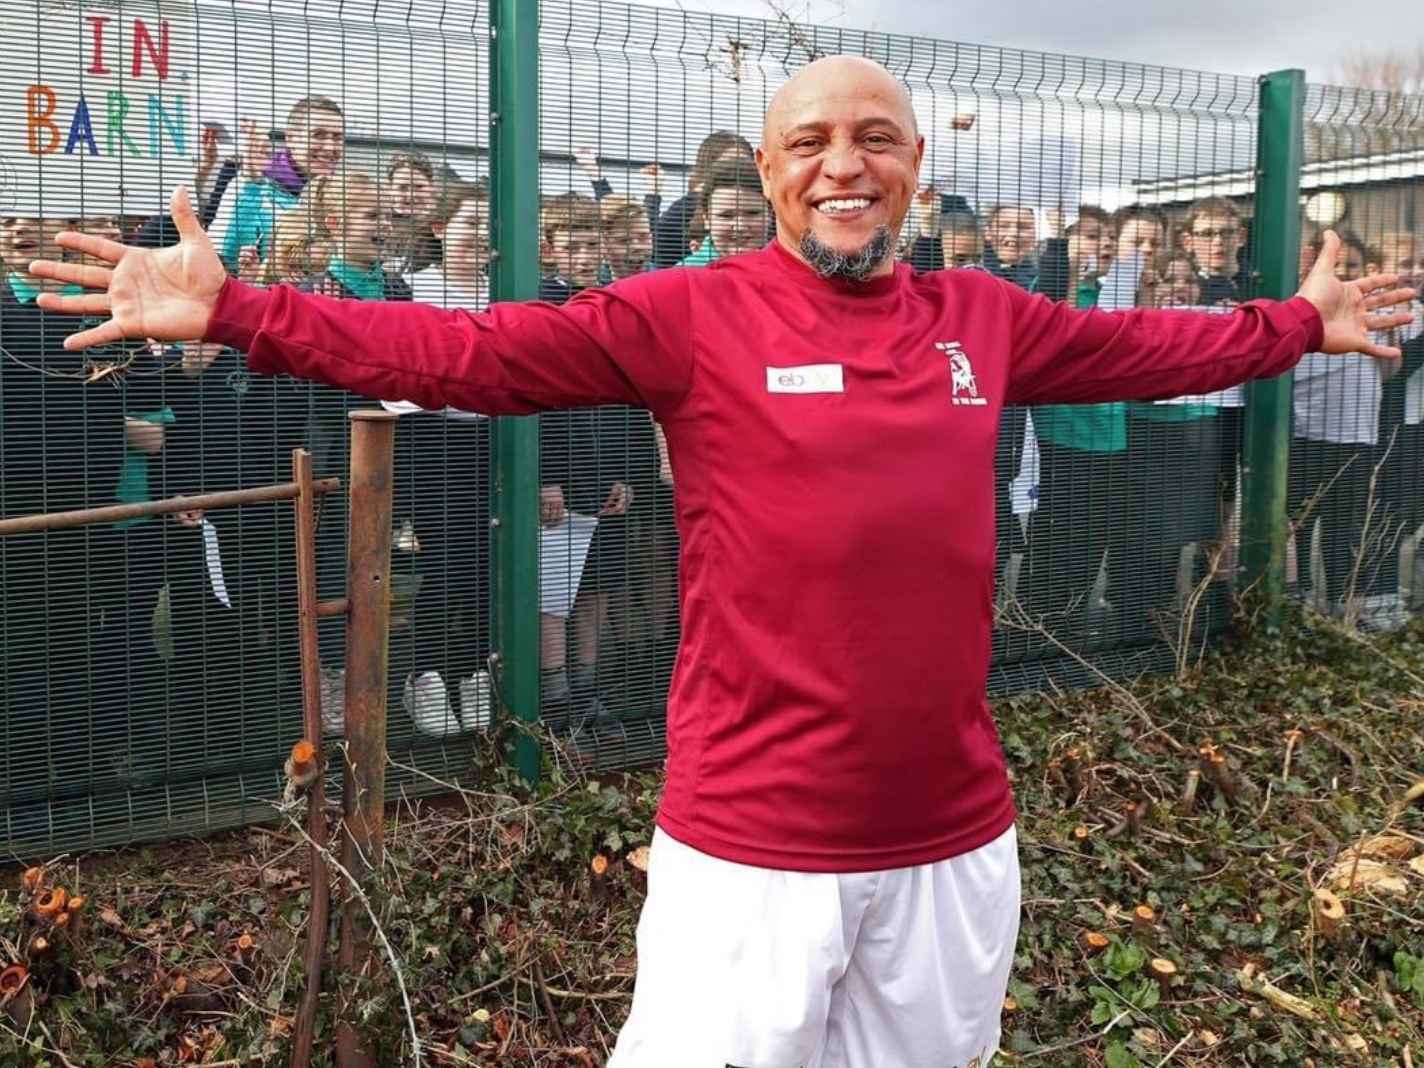 Brazil legend Roberto Carlos turns up for Sunday League footy – here’s how it went